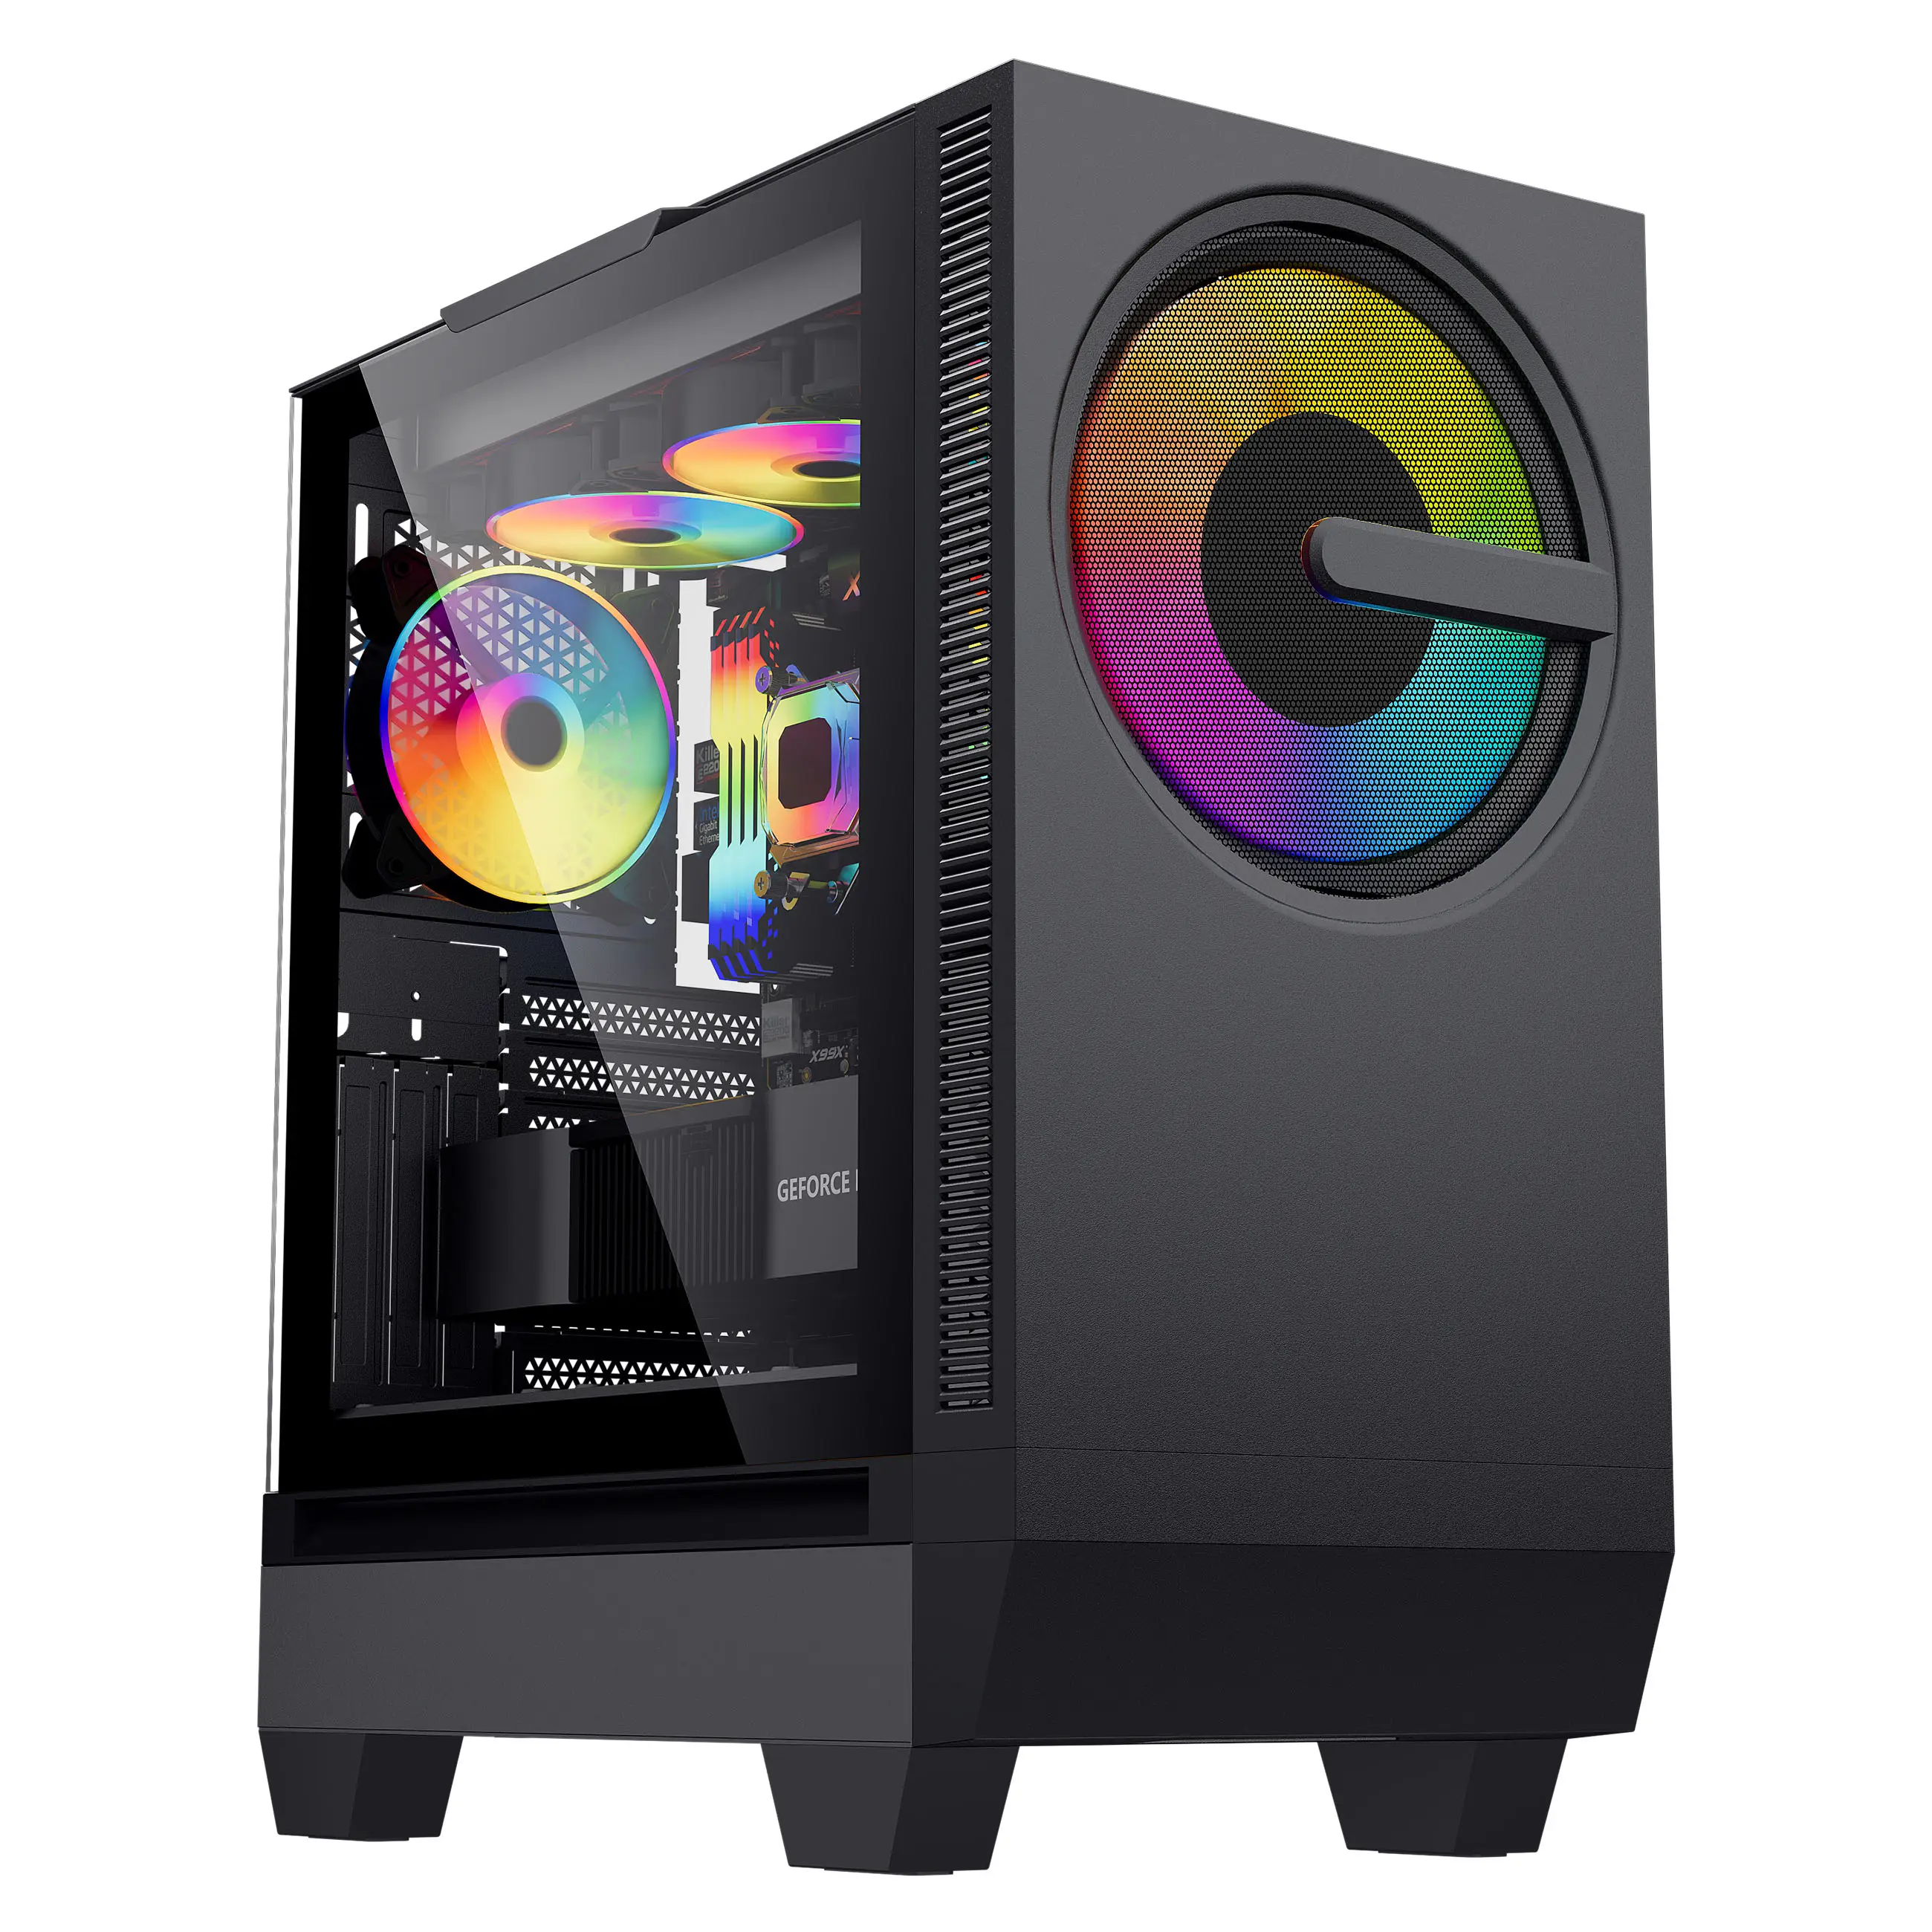 OEM/ODM Tempered Glass CPU Computer Case Tower Micro ATX Mid Tower Pc Cabinet with RGB Fans for Gaming